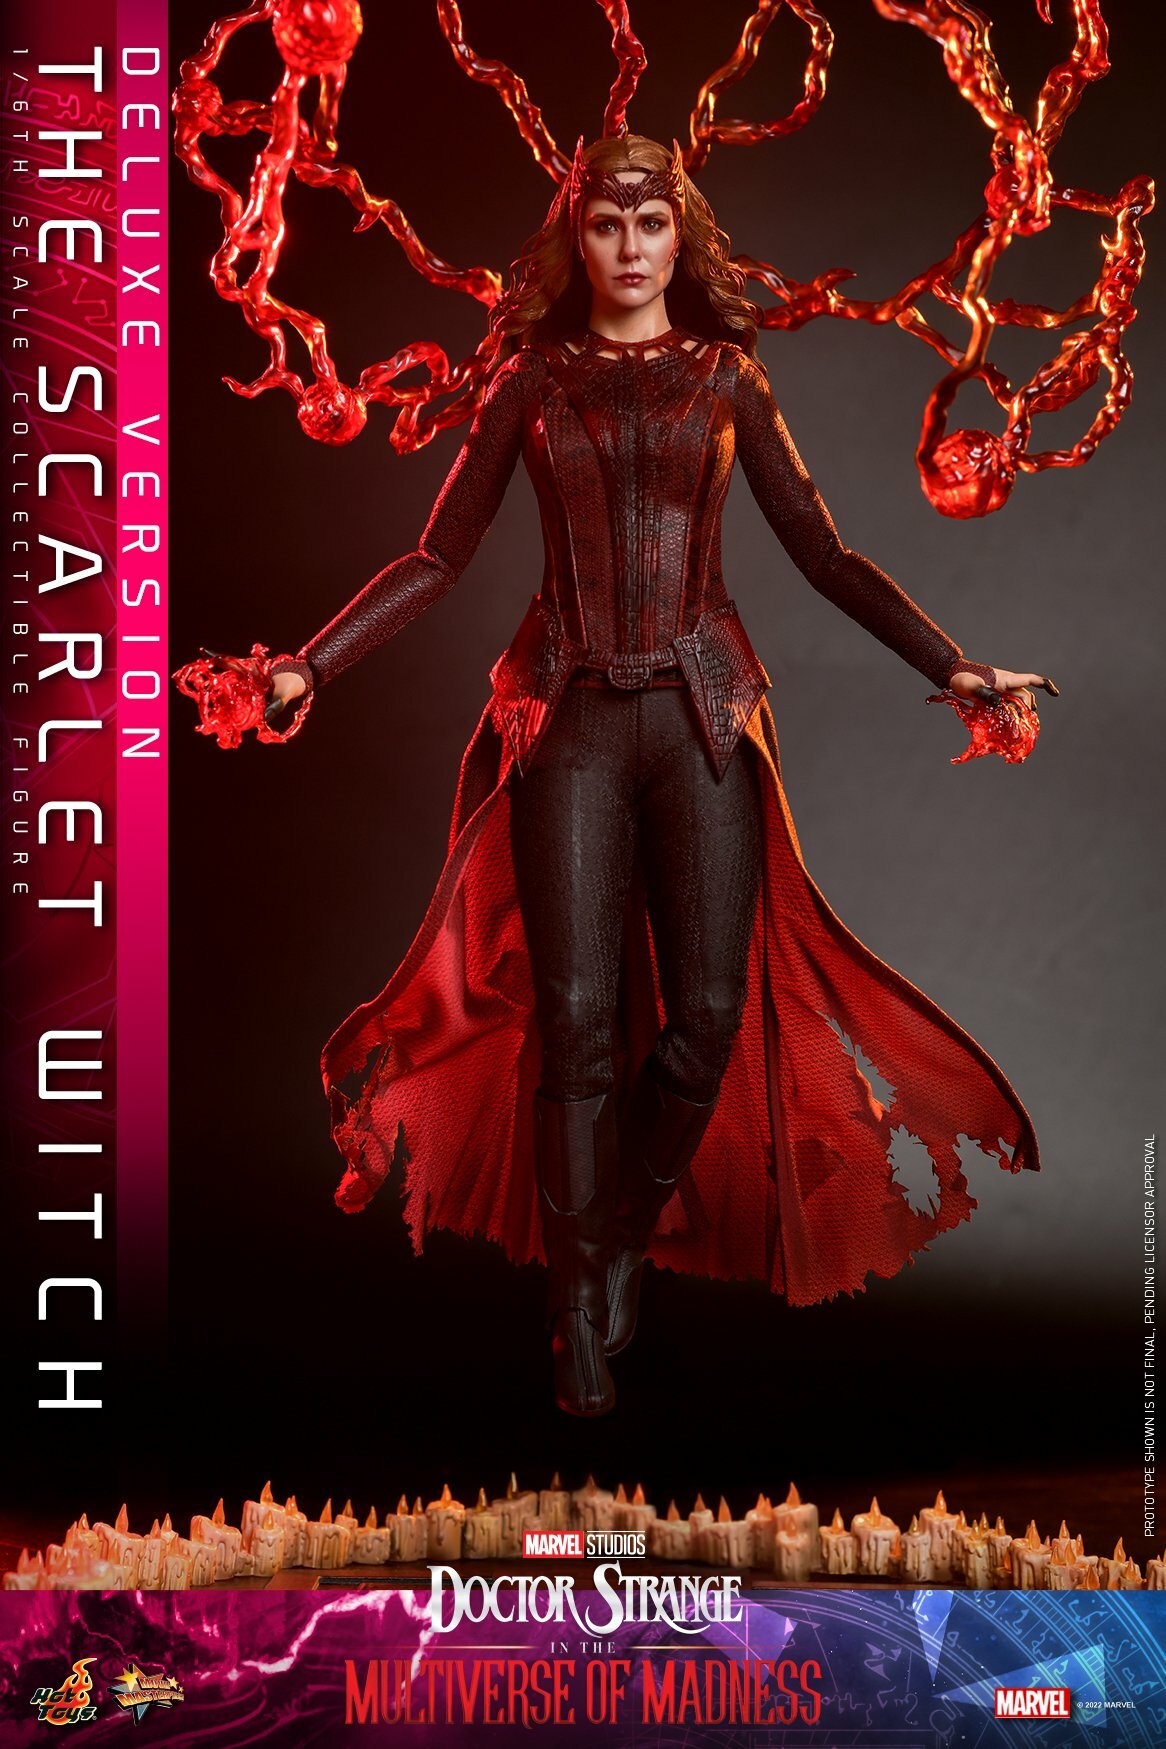 Hot-Toy-Multiverse-of-Madness-Scarlet-Witch-DX-003.jpg.11d15b41f8b5e934e586093313a36f33.jpg